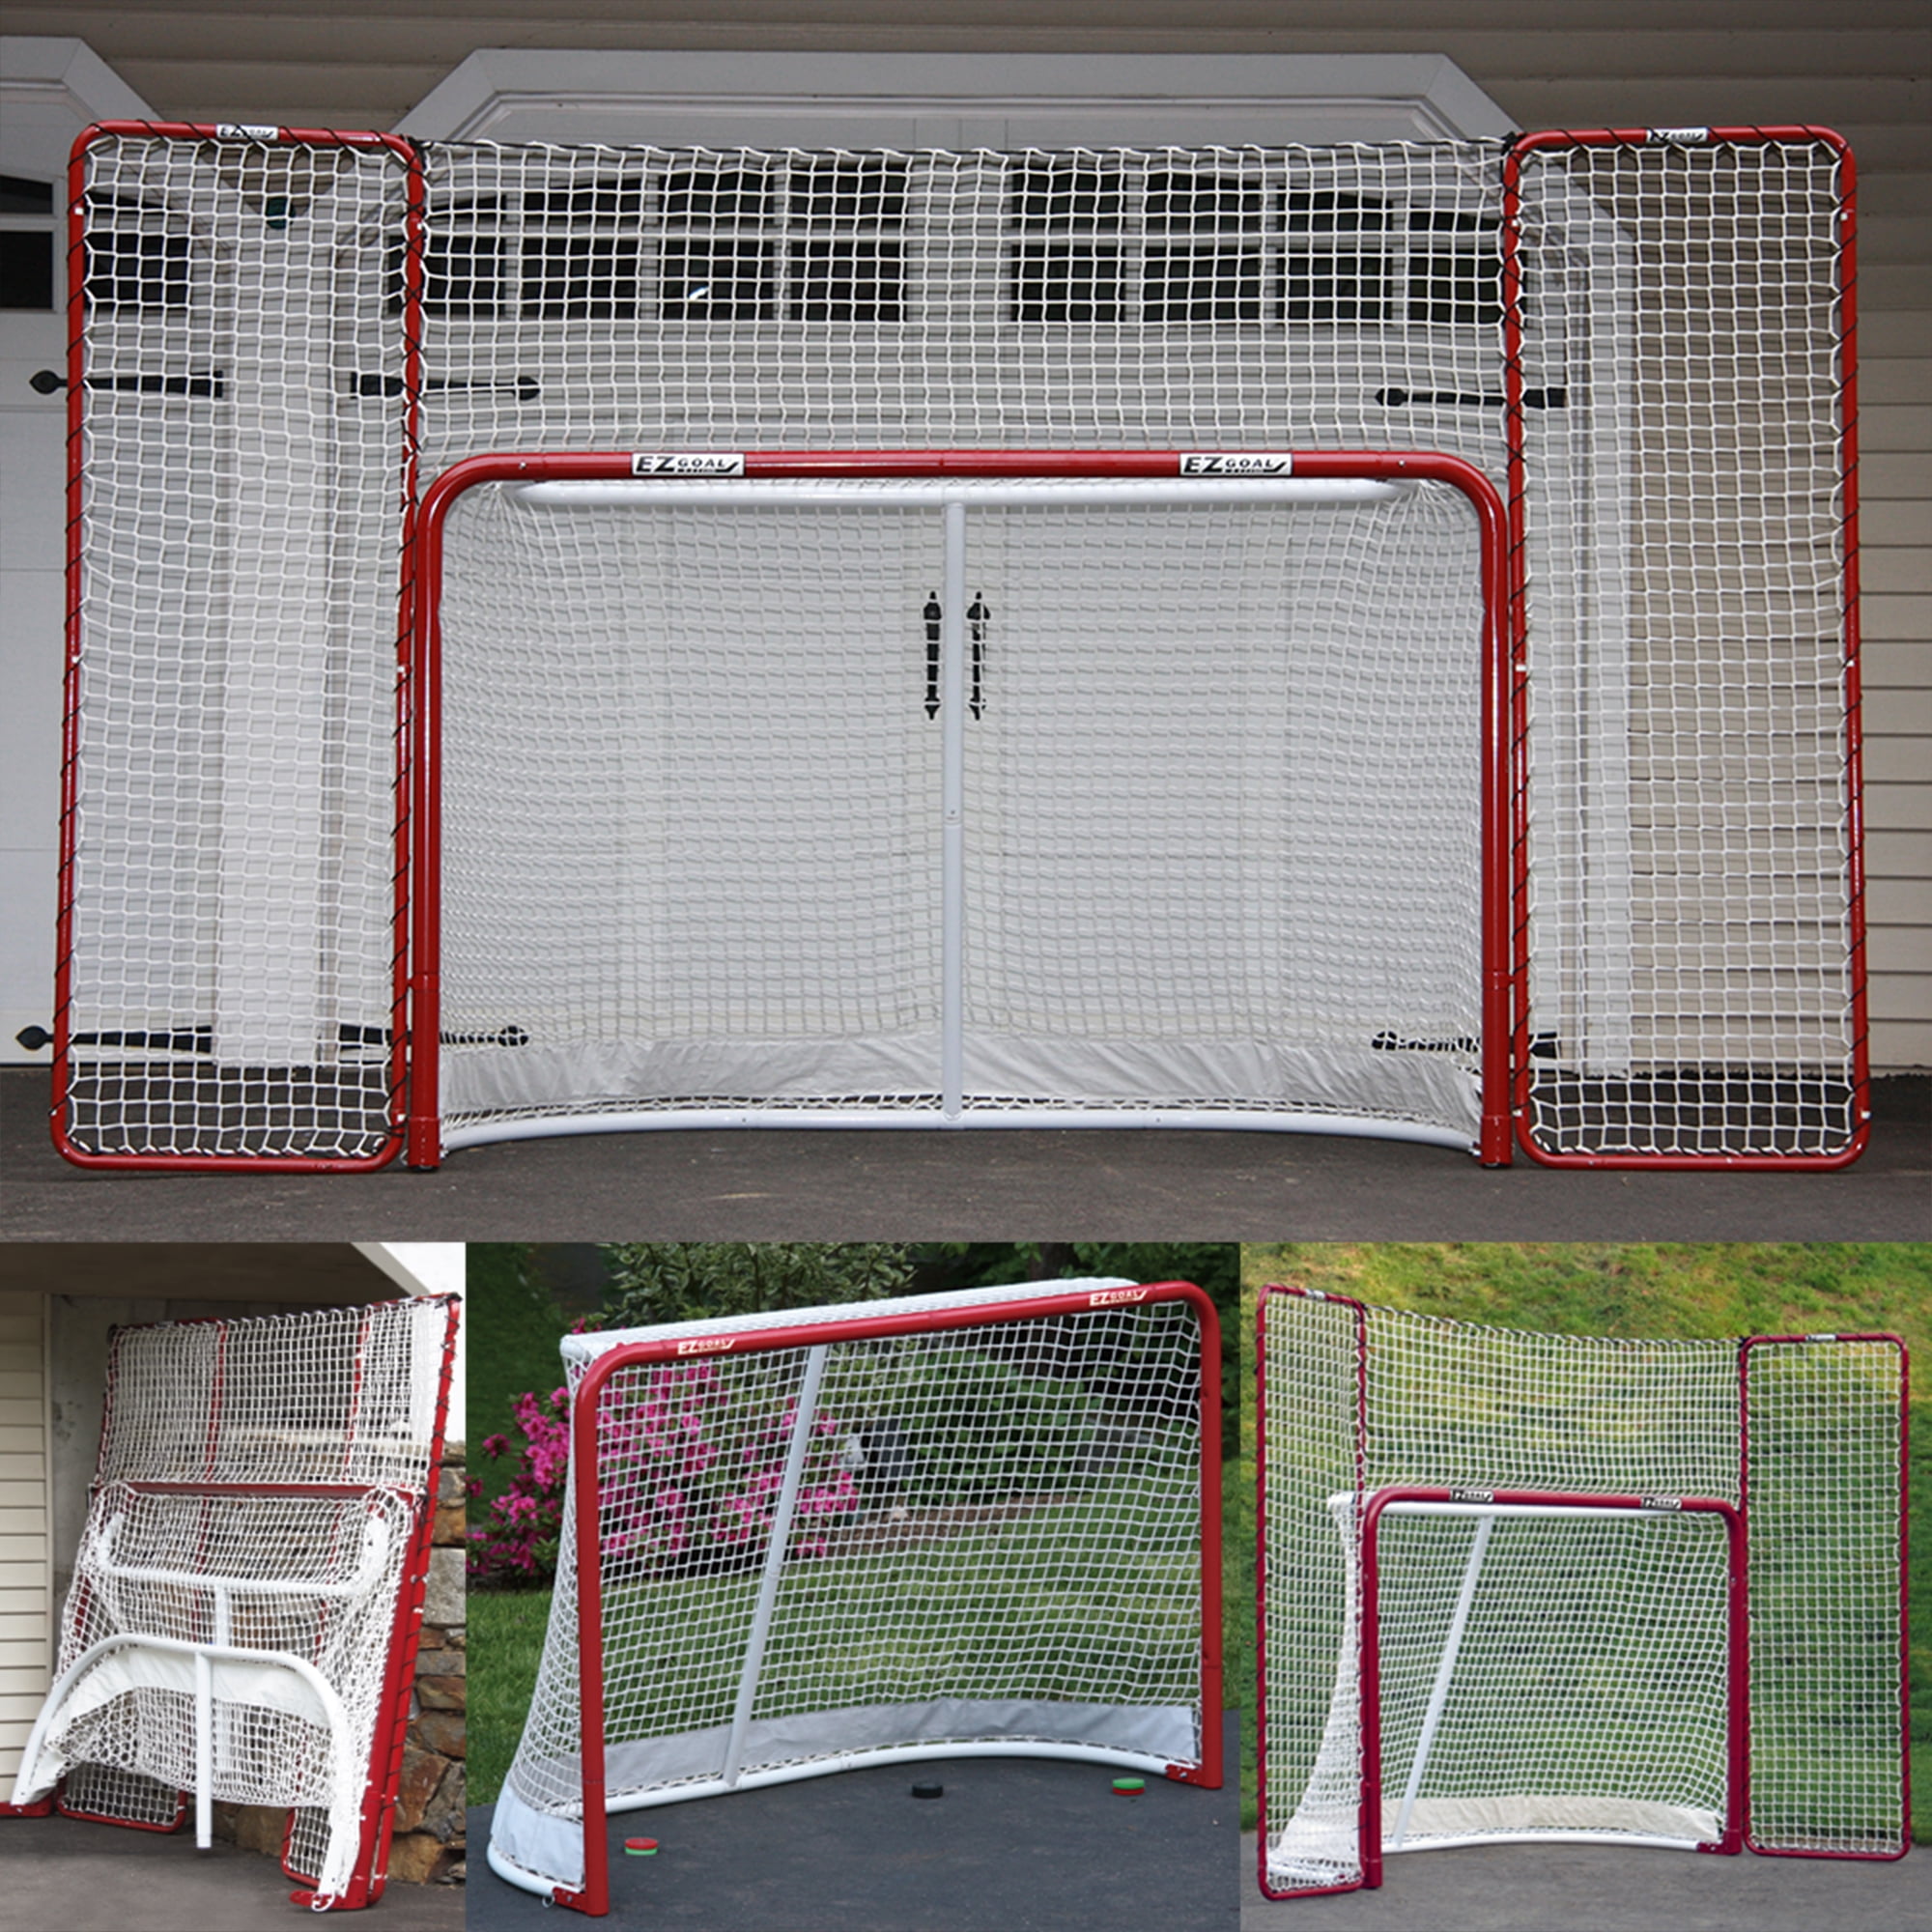 EZGoal Hockey Folding Pro Goal Backstop Targets 2 Inch Red White Outdoor 67008 